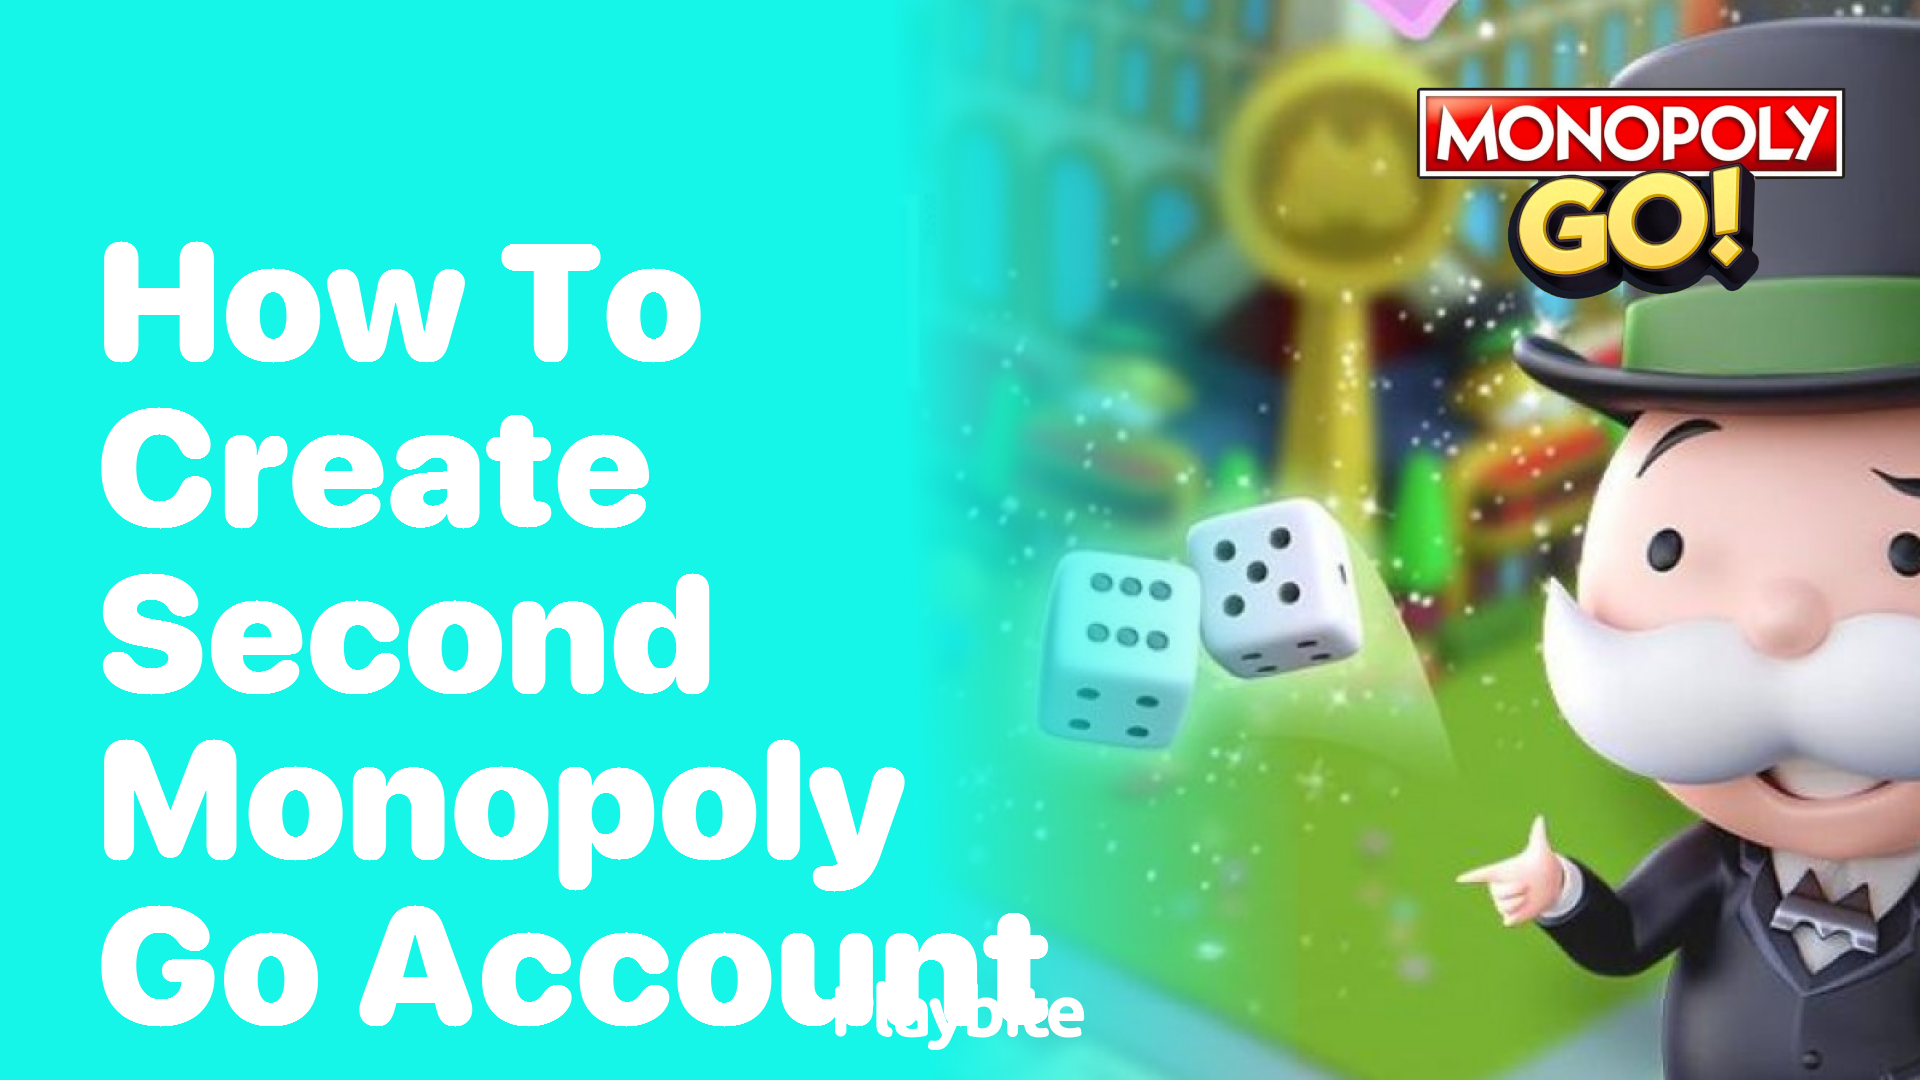 How to Create a Second Monopoly Go Account